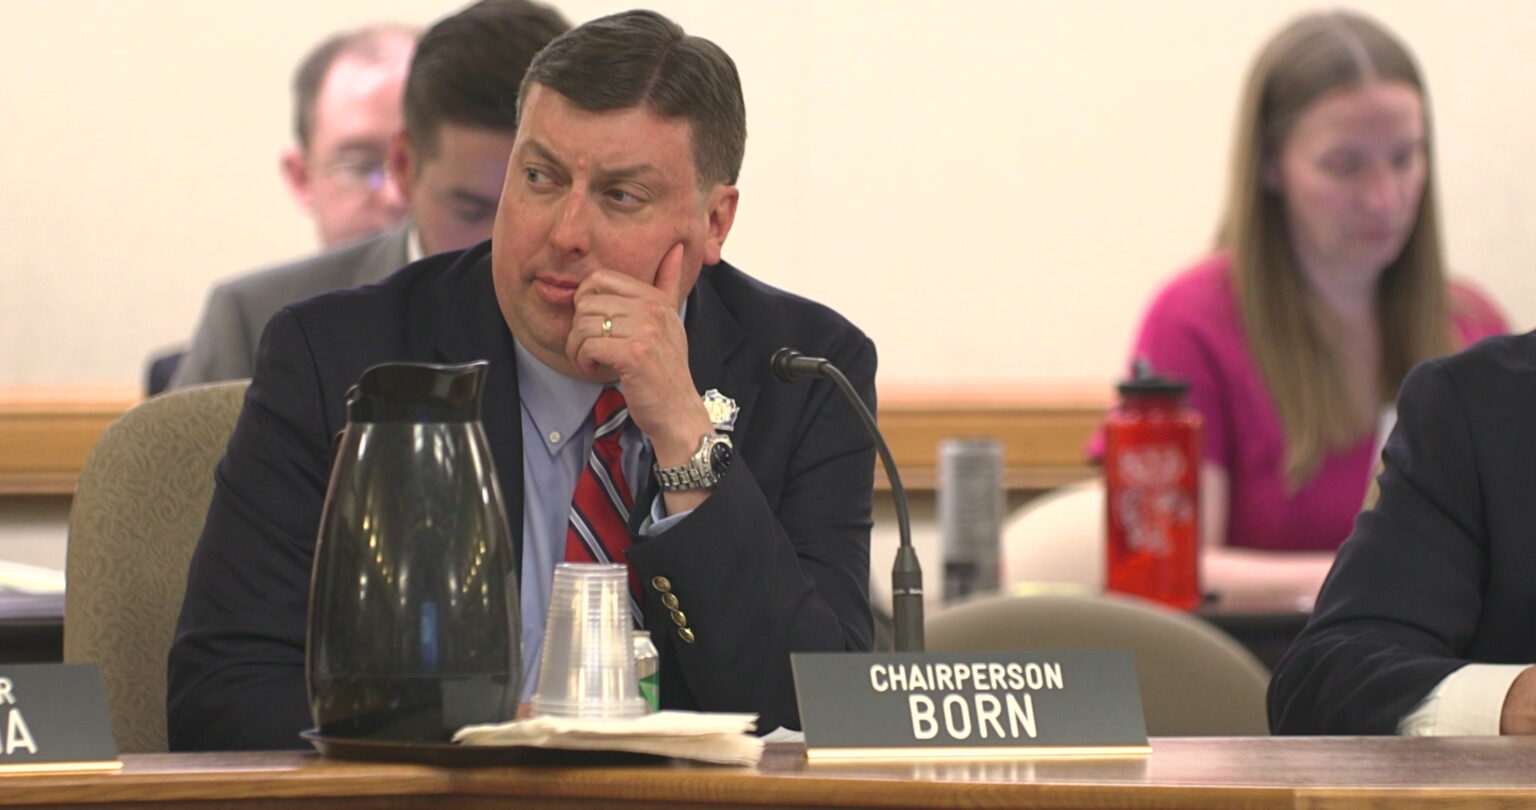 Mark Born holds his left hand to his face while sitting at a table with a microphone, a sign reading Chairperson Born, a carafe and stack of plastic cups, with other people who are out of focus seated in the background.